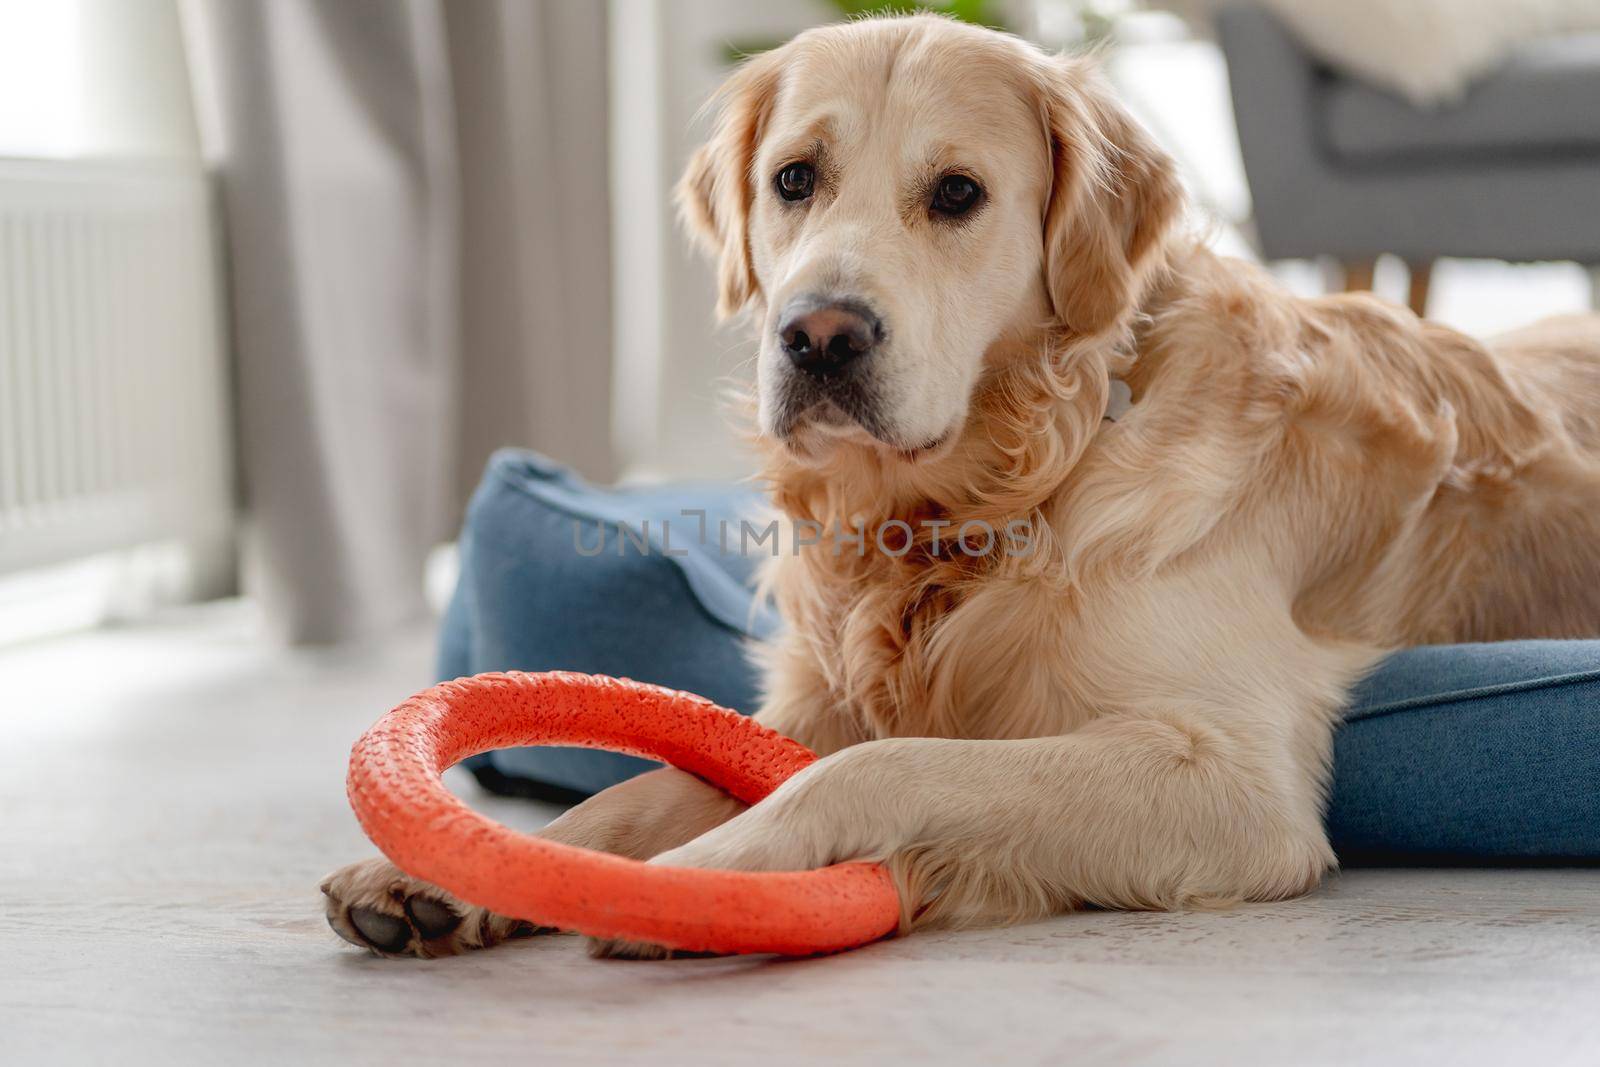 Golden retriever dog biting ring toy while lying on dog bed at home